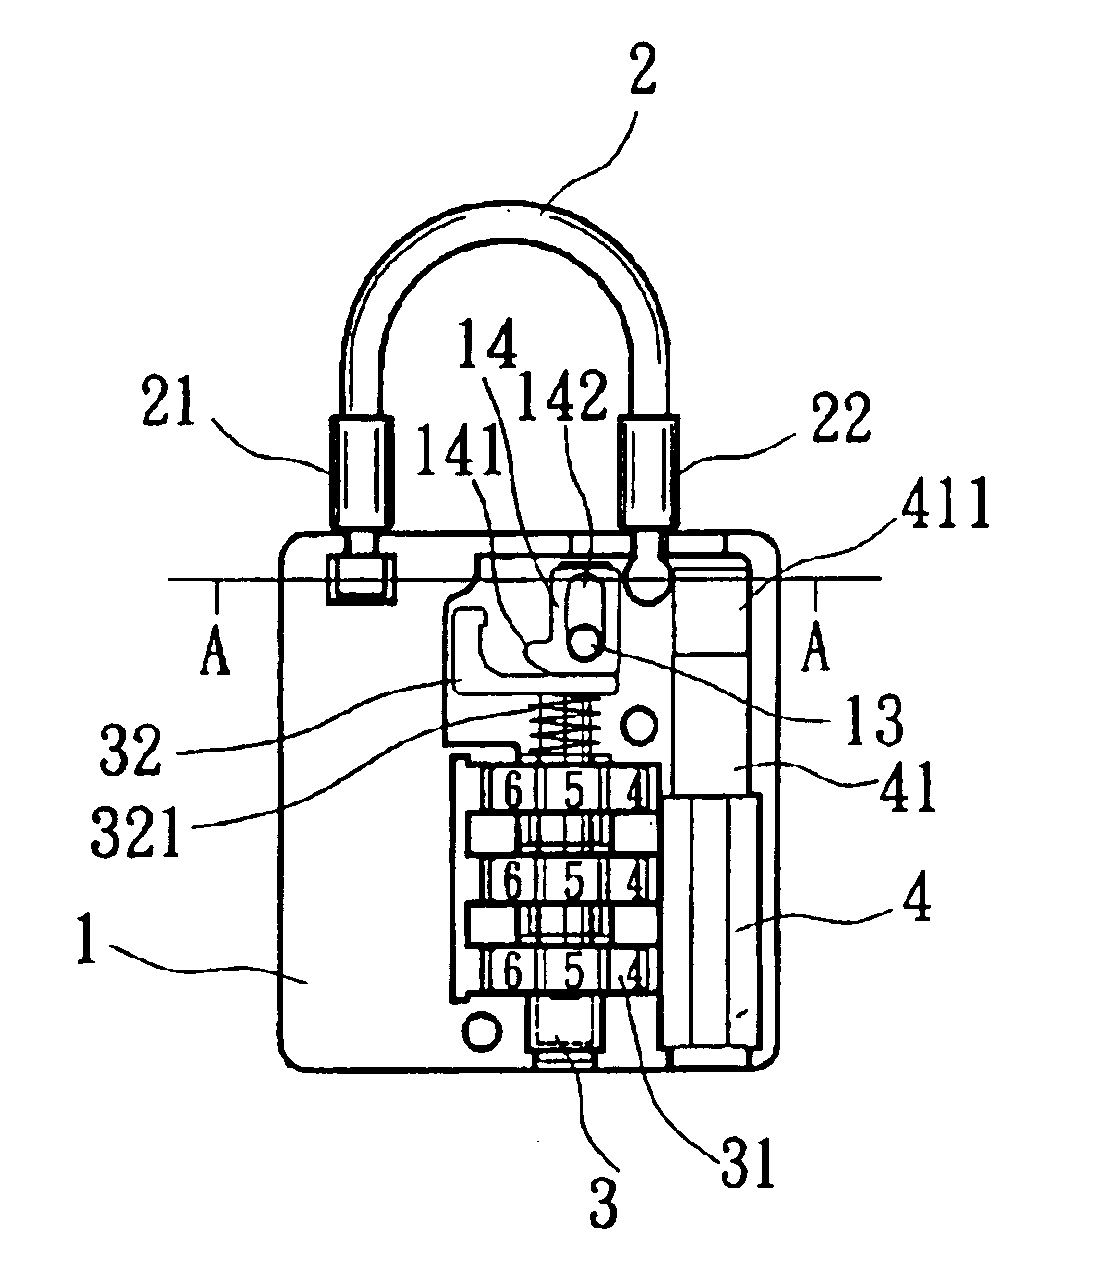 Lock with bendable shackle element openable in two ways